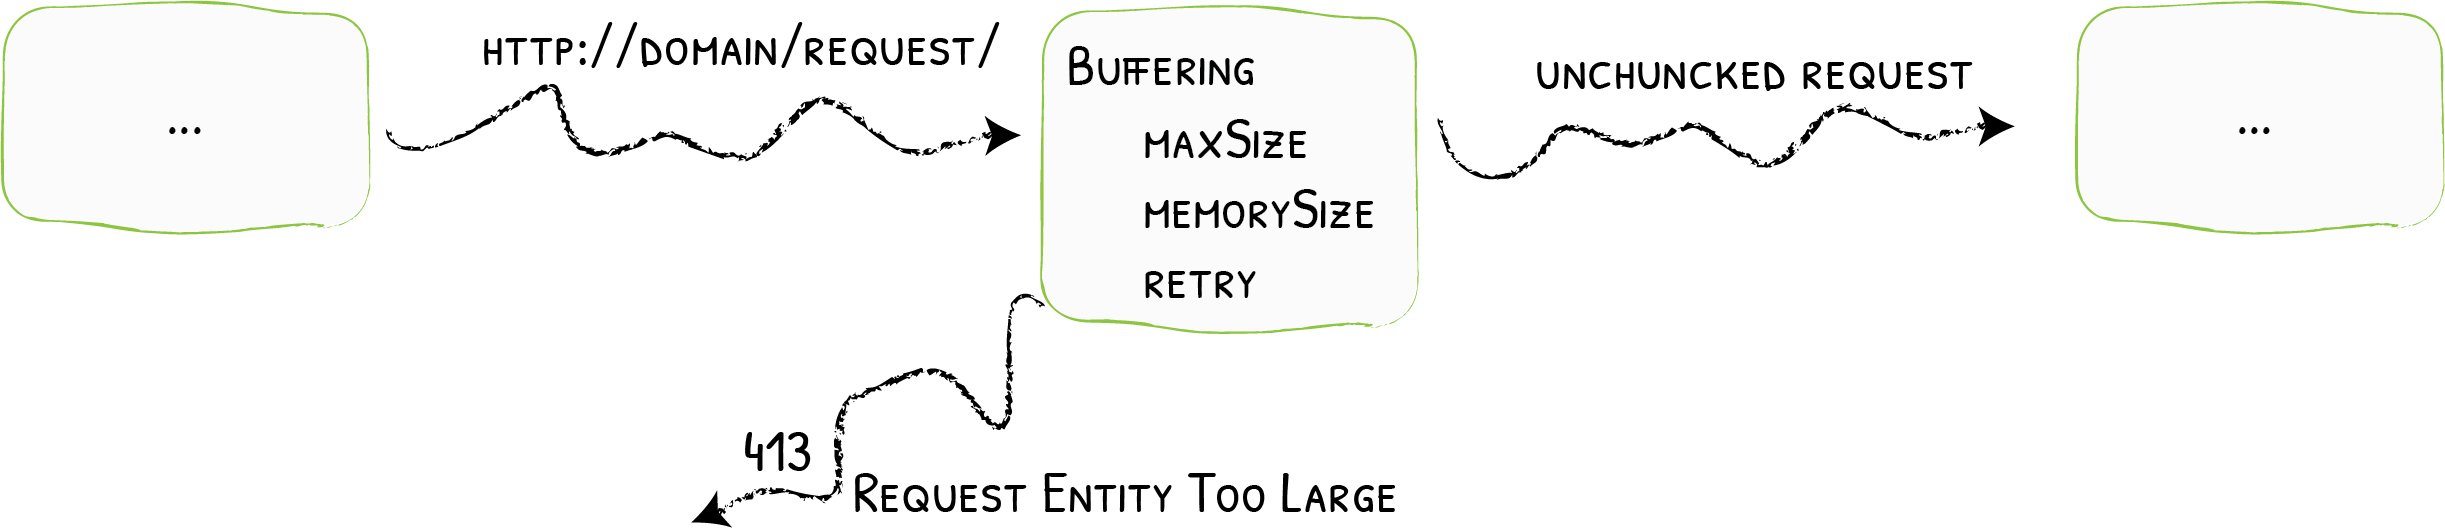 Diagram showing how buffering works.